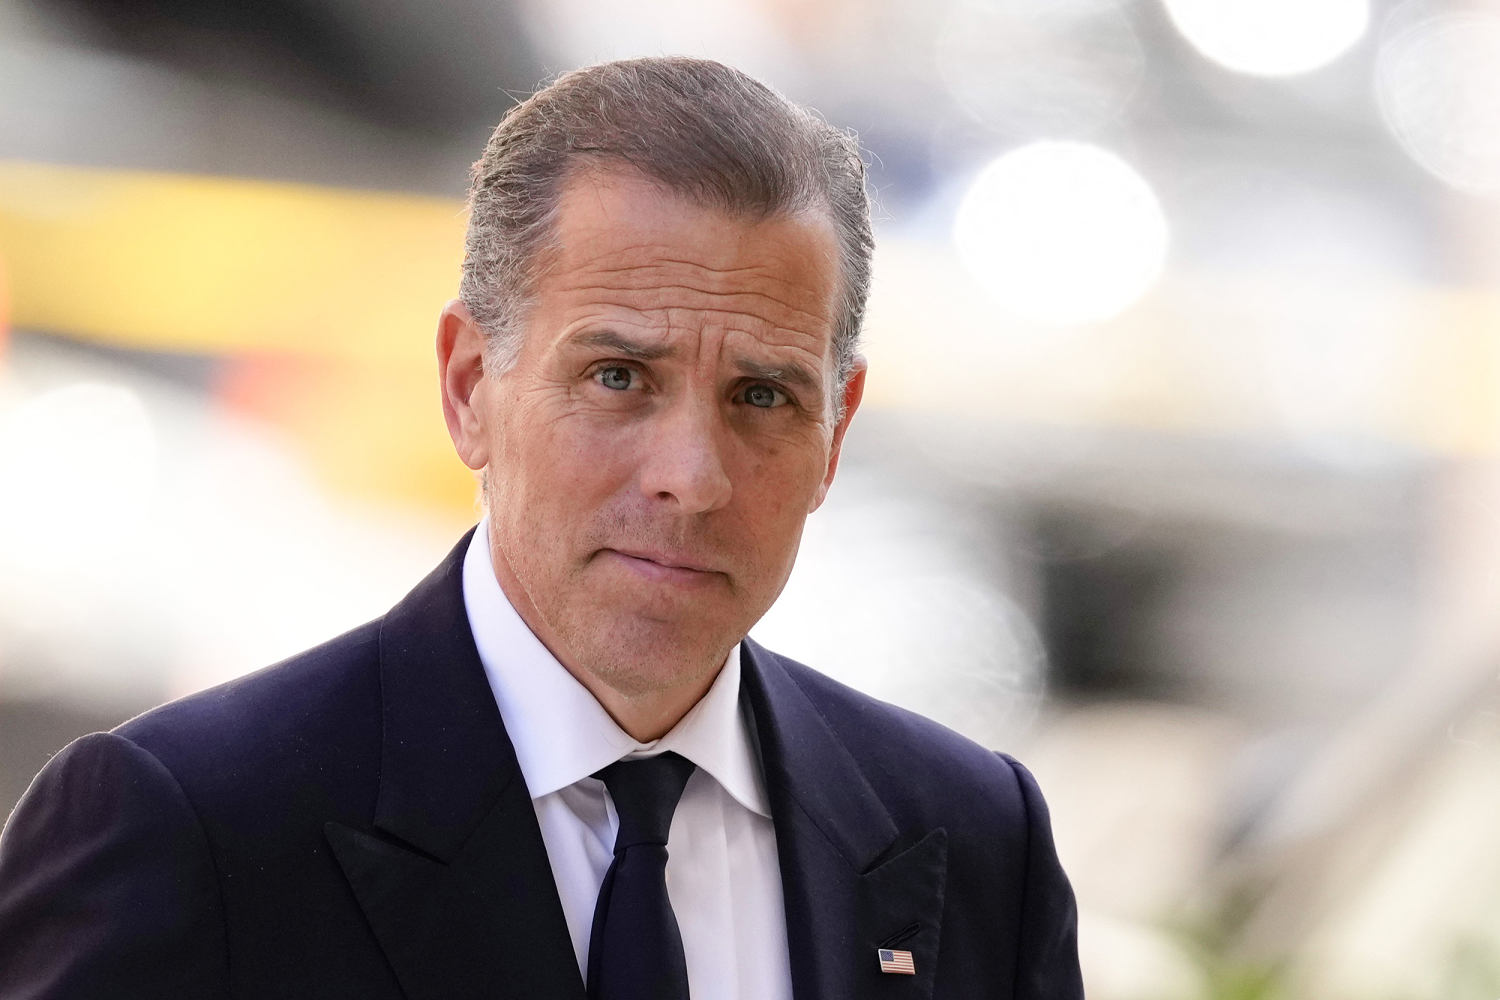 As a sober person, I know the danger of Republicans’ tactic in the Hunter Biden case